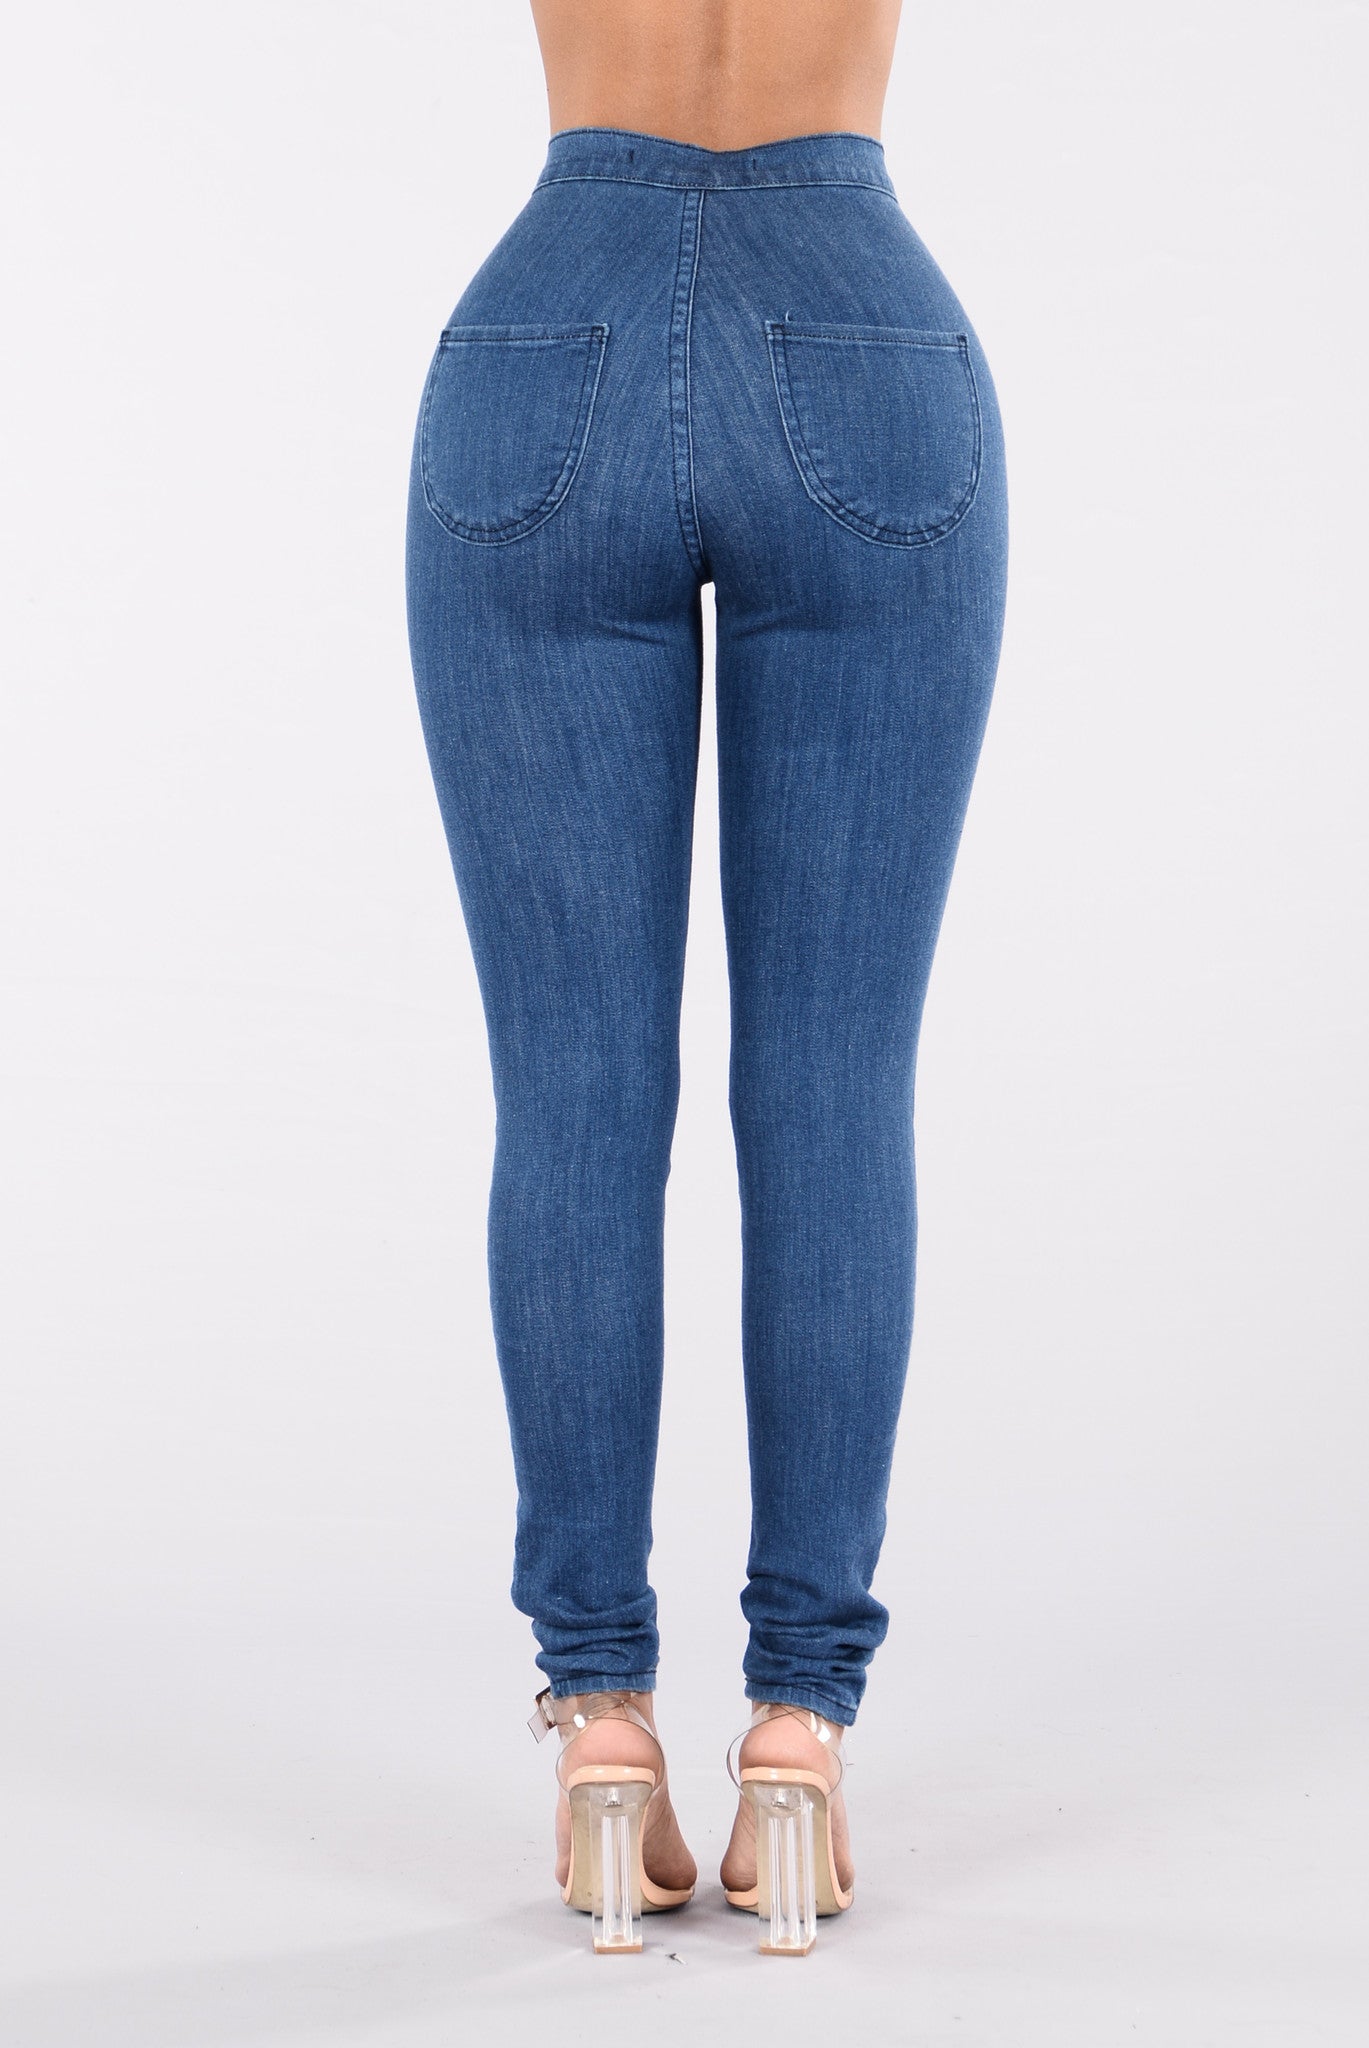 Easily My Fave Jeans - Med Blue